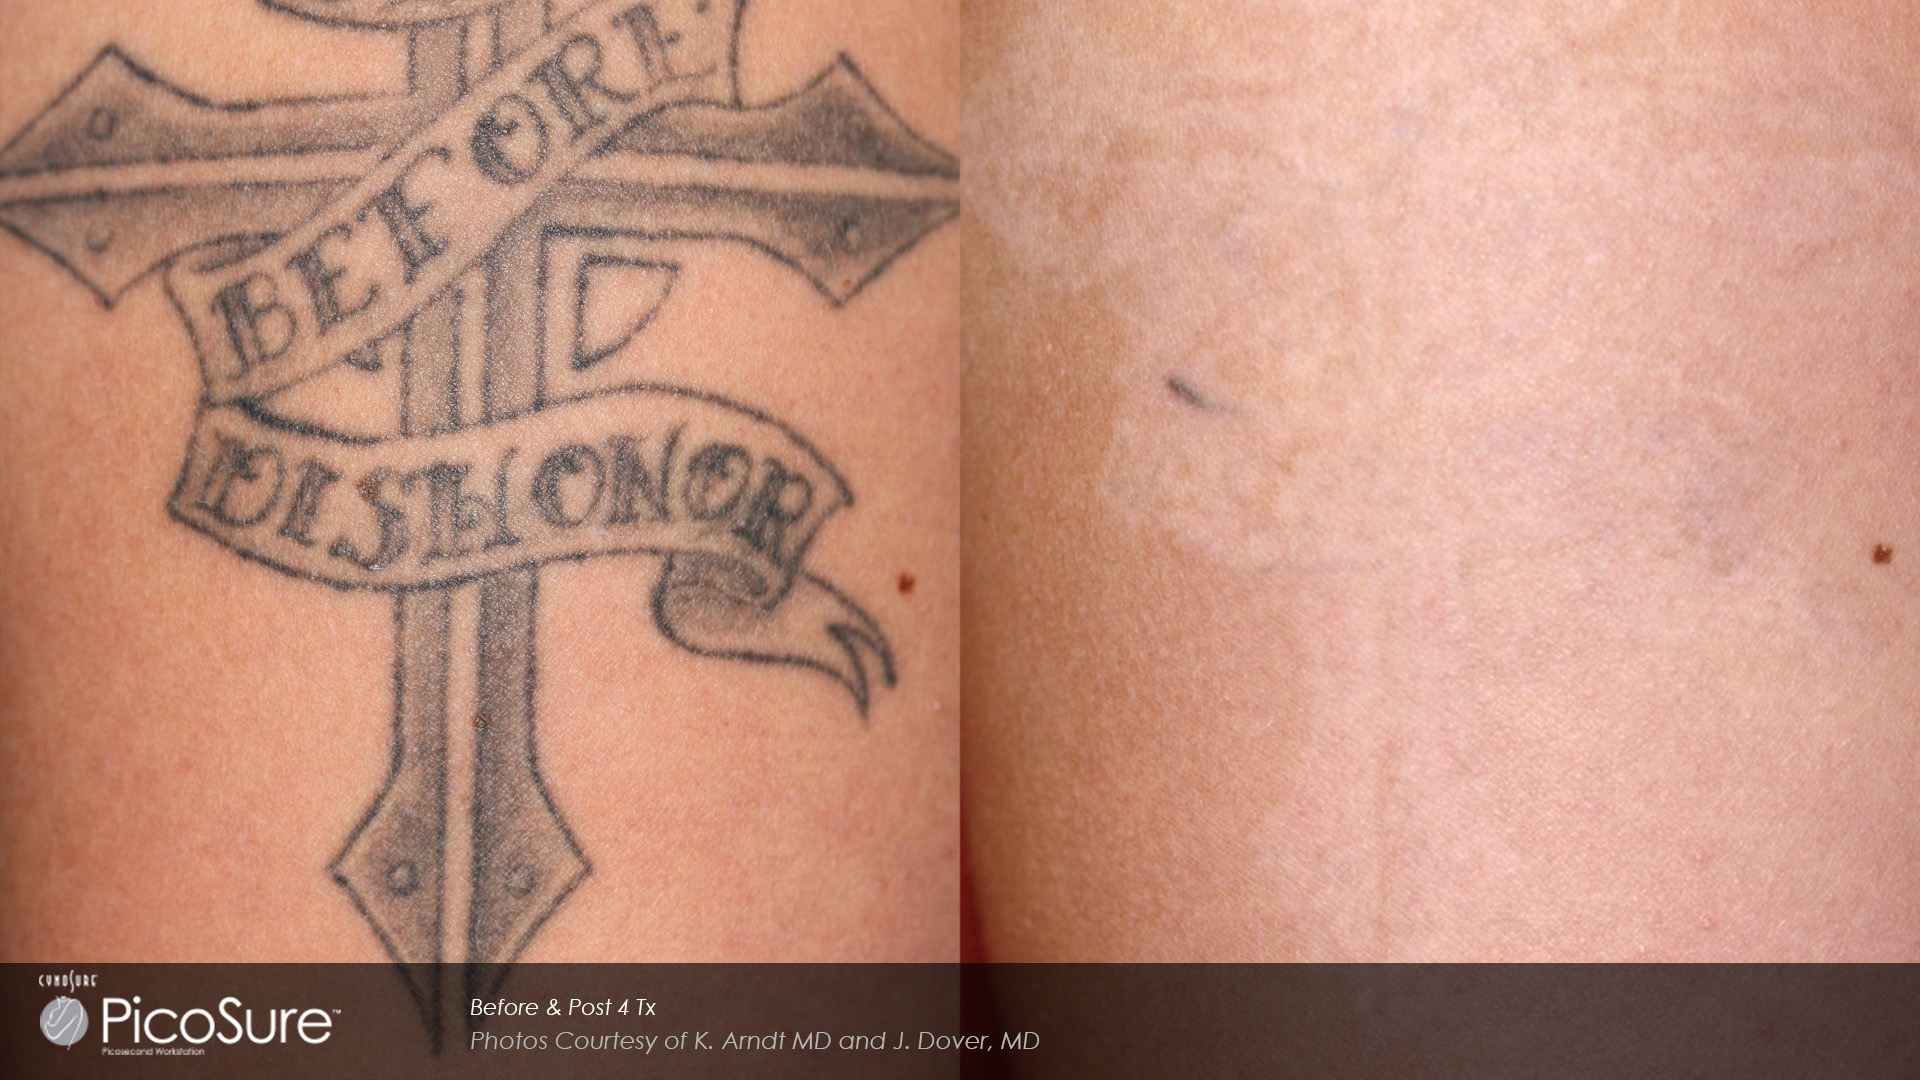 before and after PicoSure tattoo removal photos.